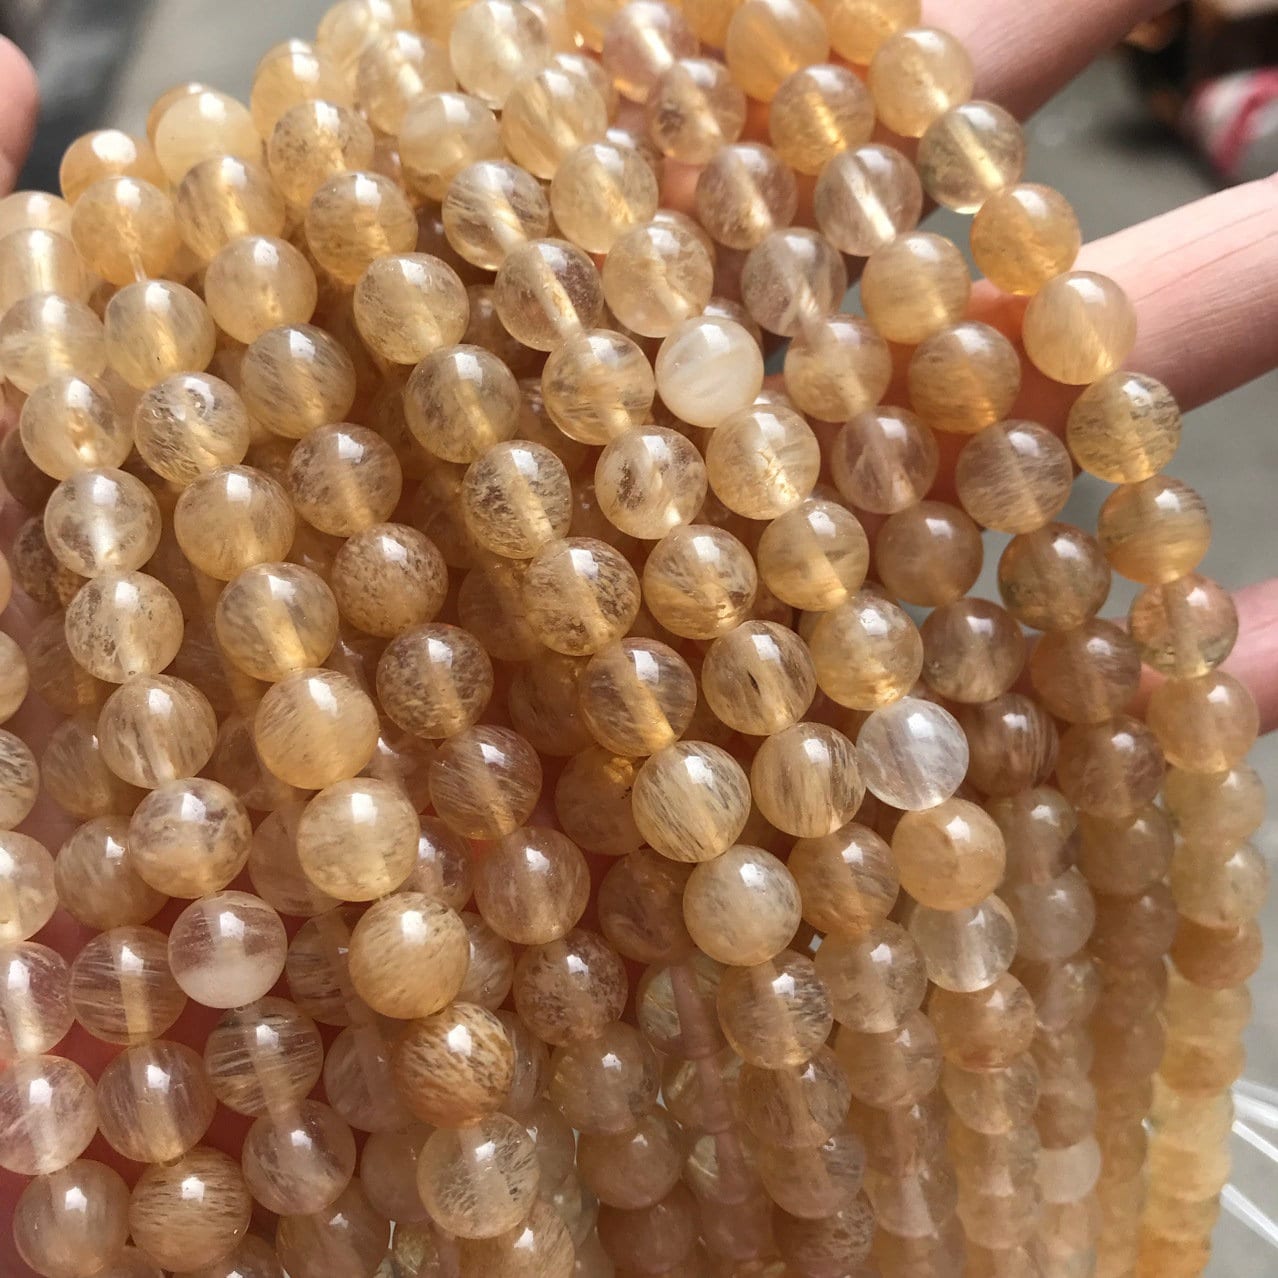 Smooth Round, Natural MOP (Mother of Pearl) Beads, Choose Si